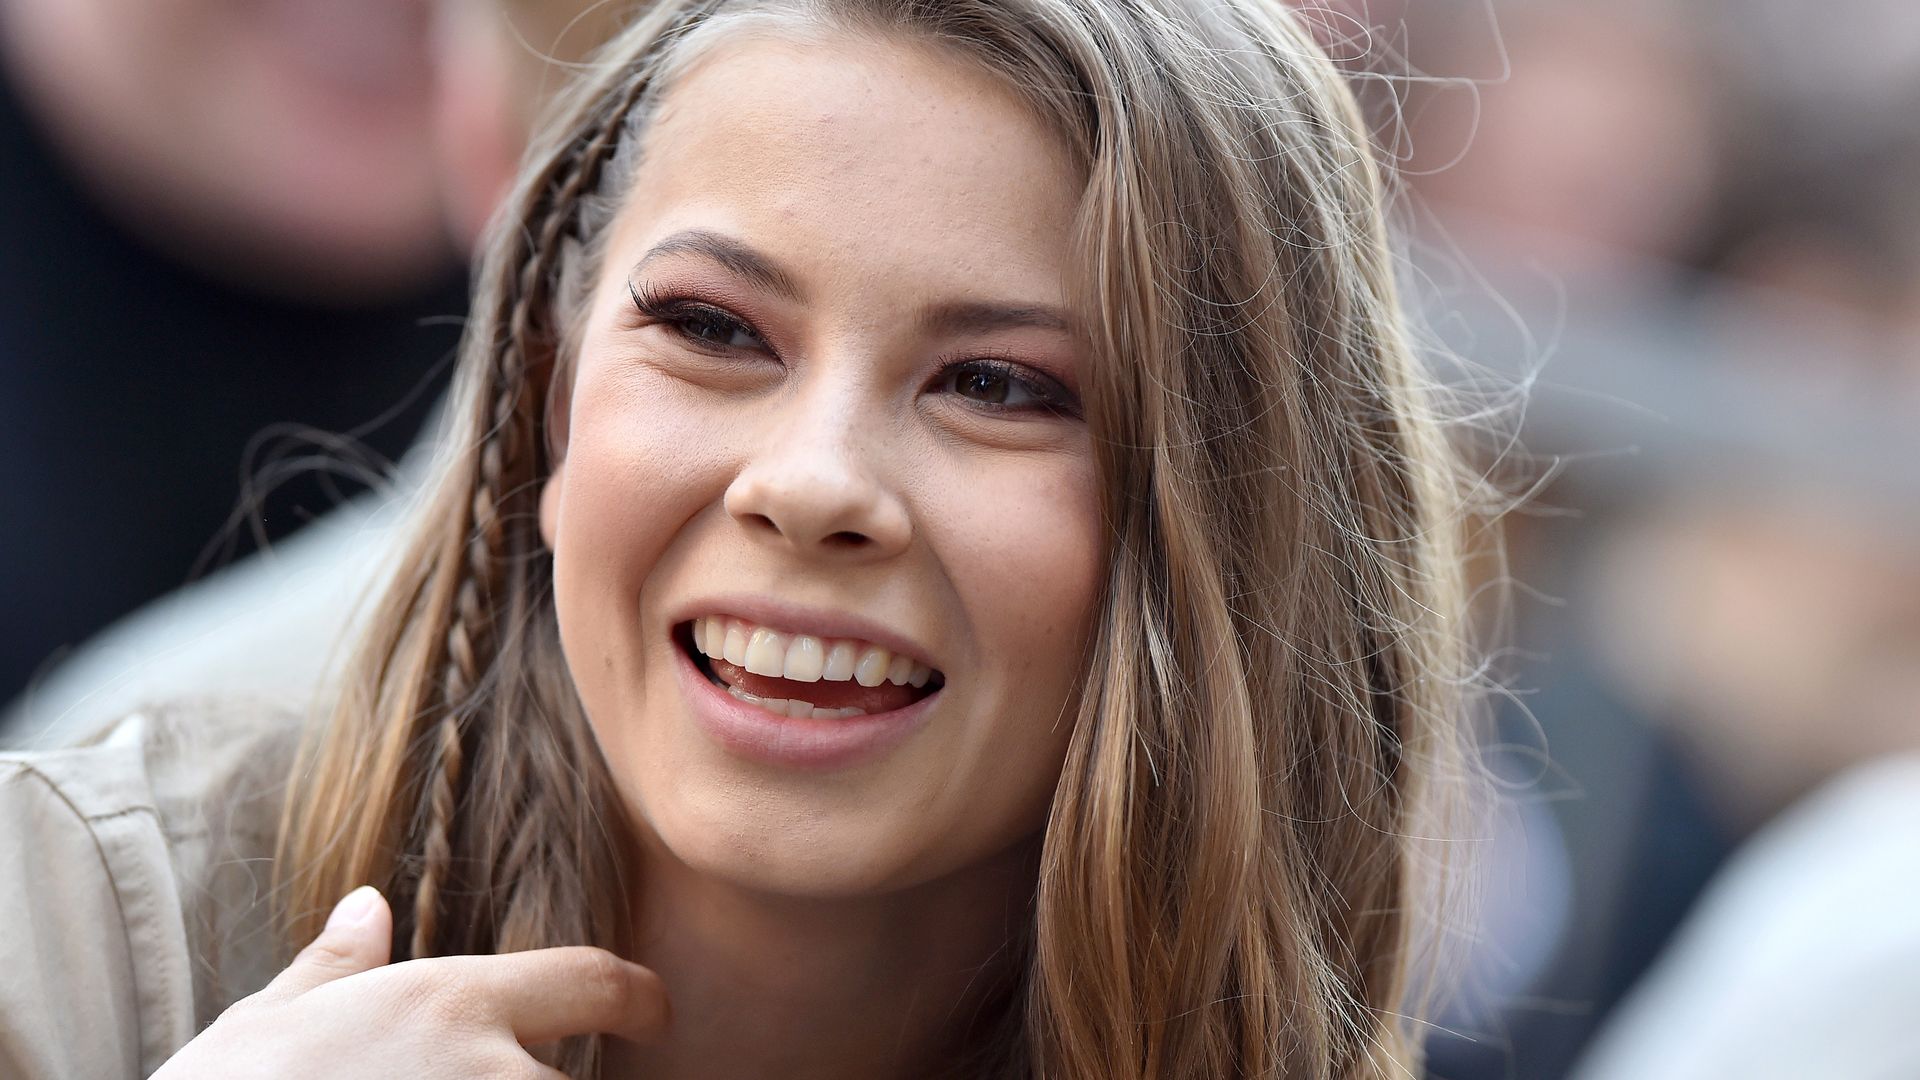 Bindi Irwin beamed at the camera wearing one small plait in her hair